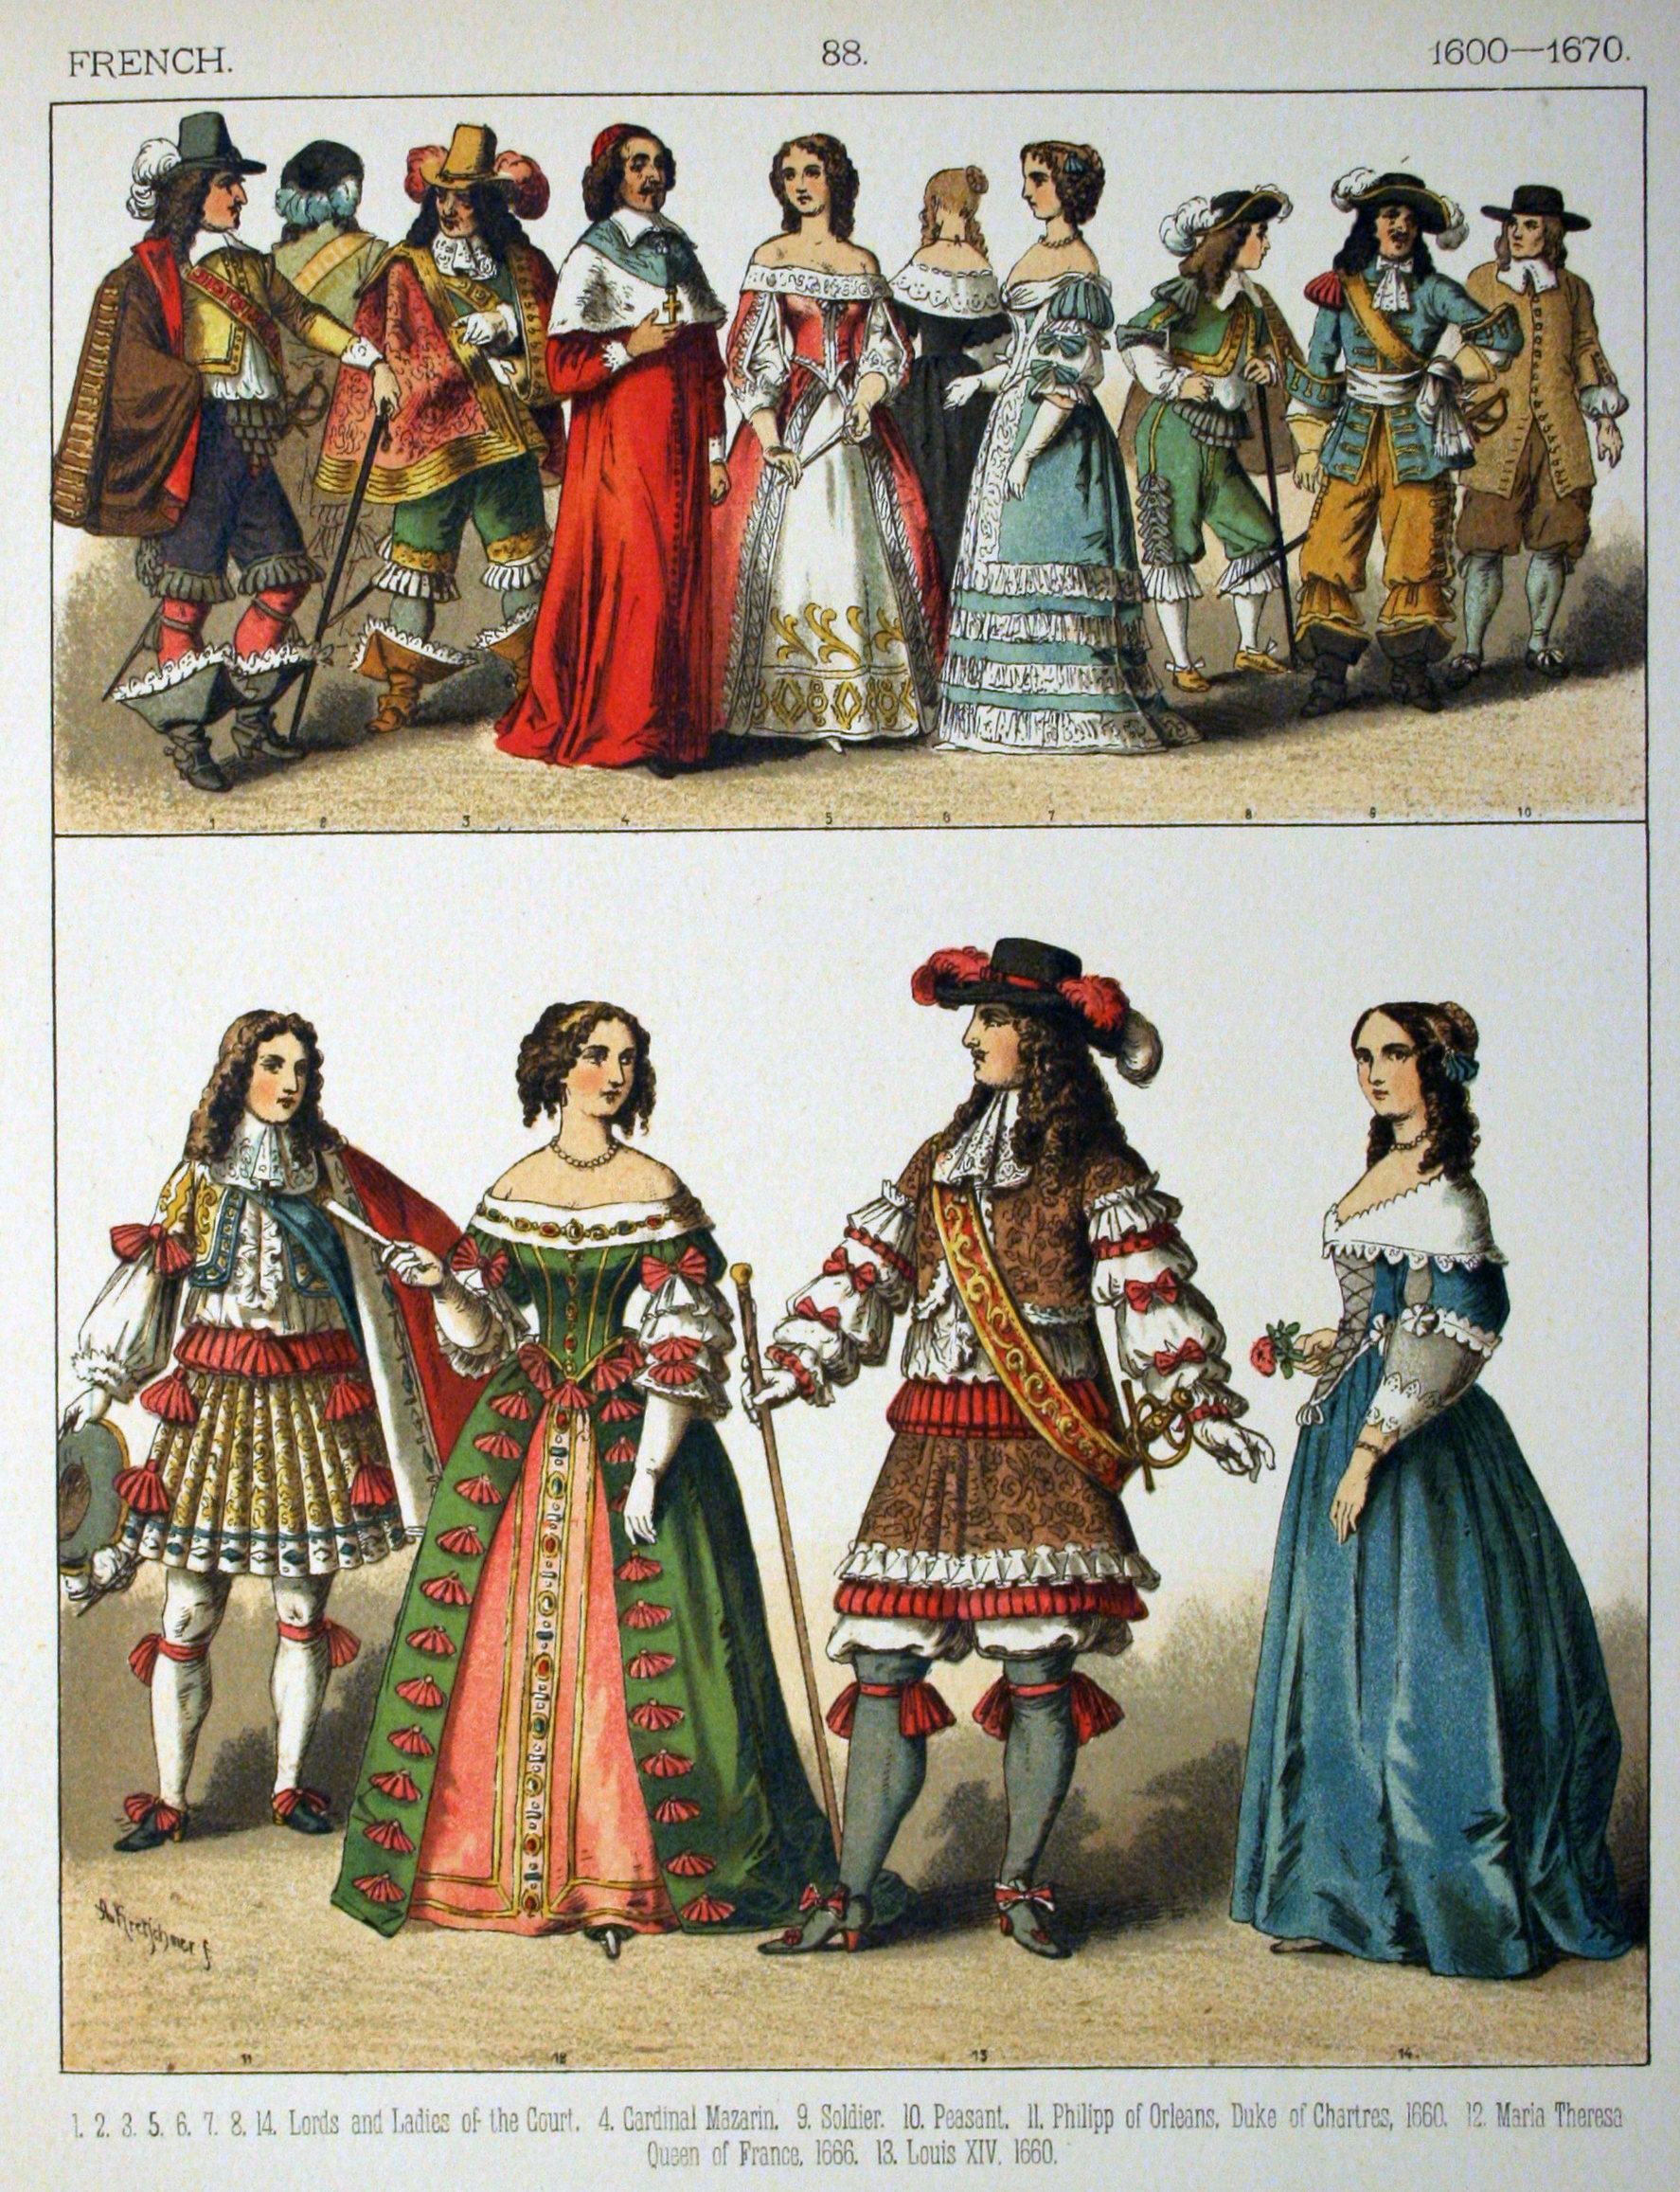 1600-1670 French. - 088 - Costumes of All Nations (1882)